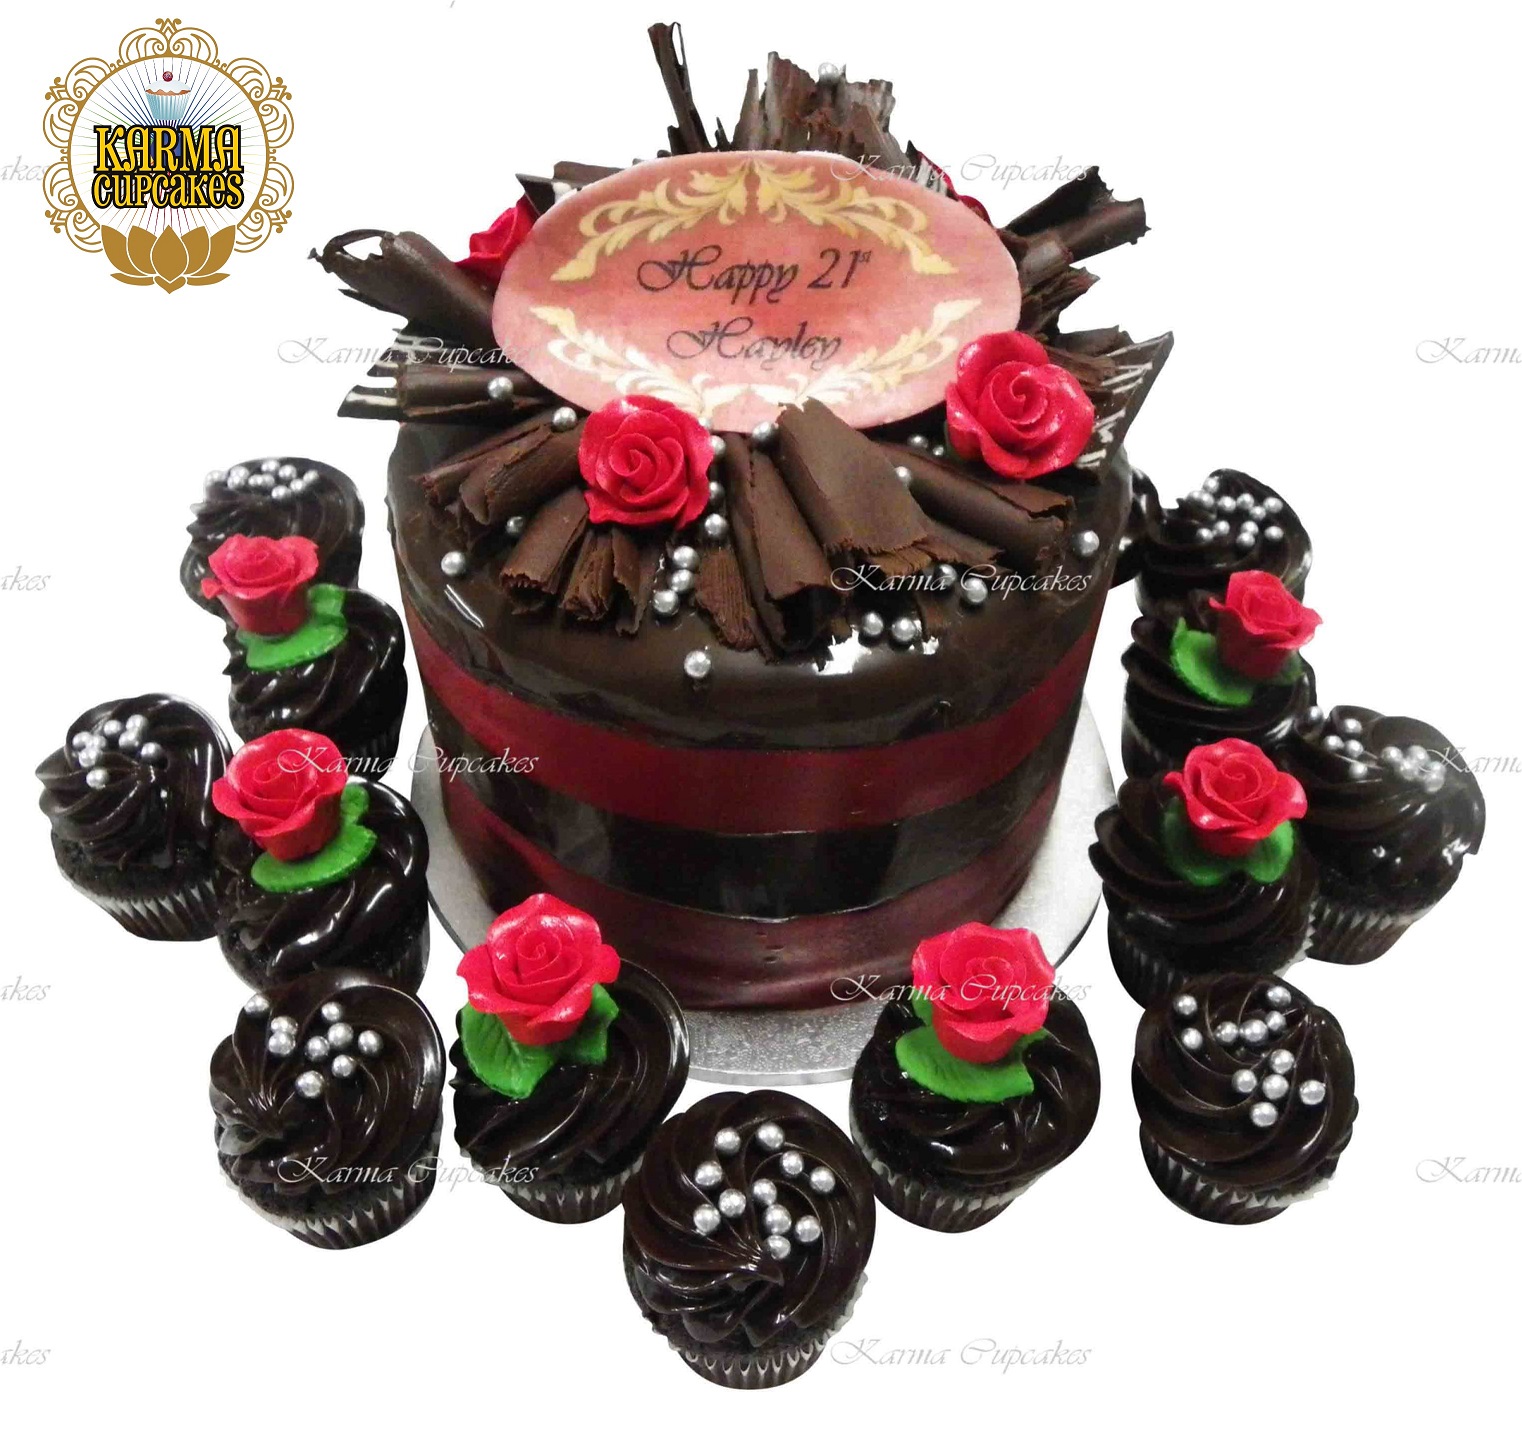 Ganach Iced Cake with Sugar Red Roses